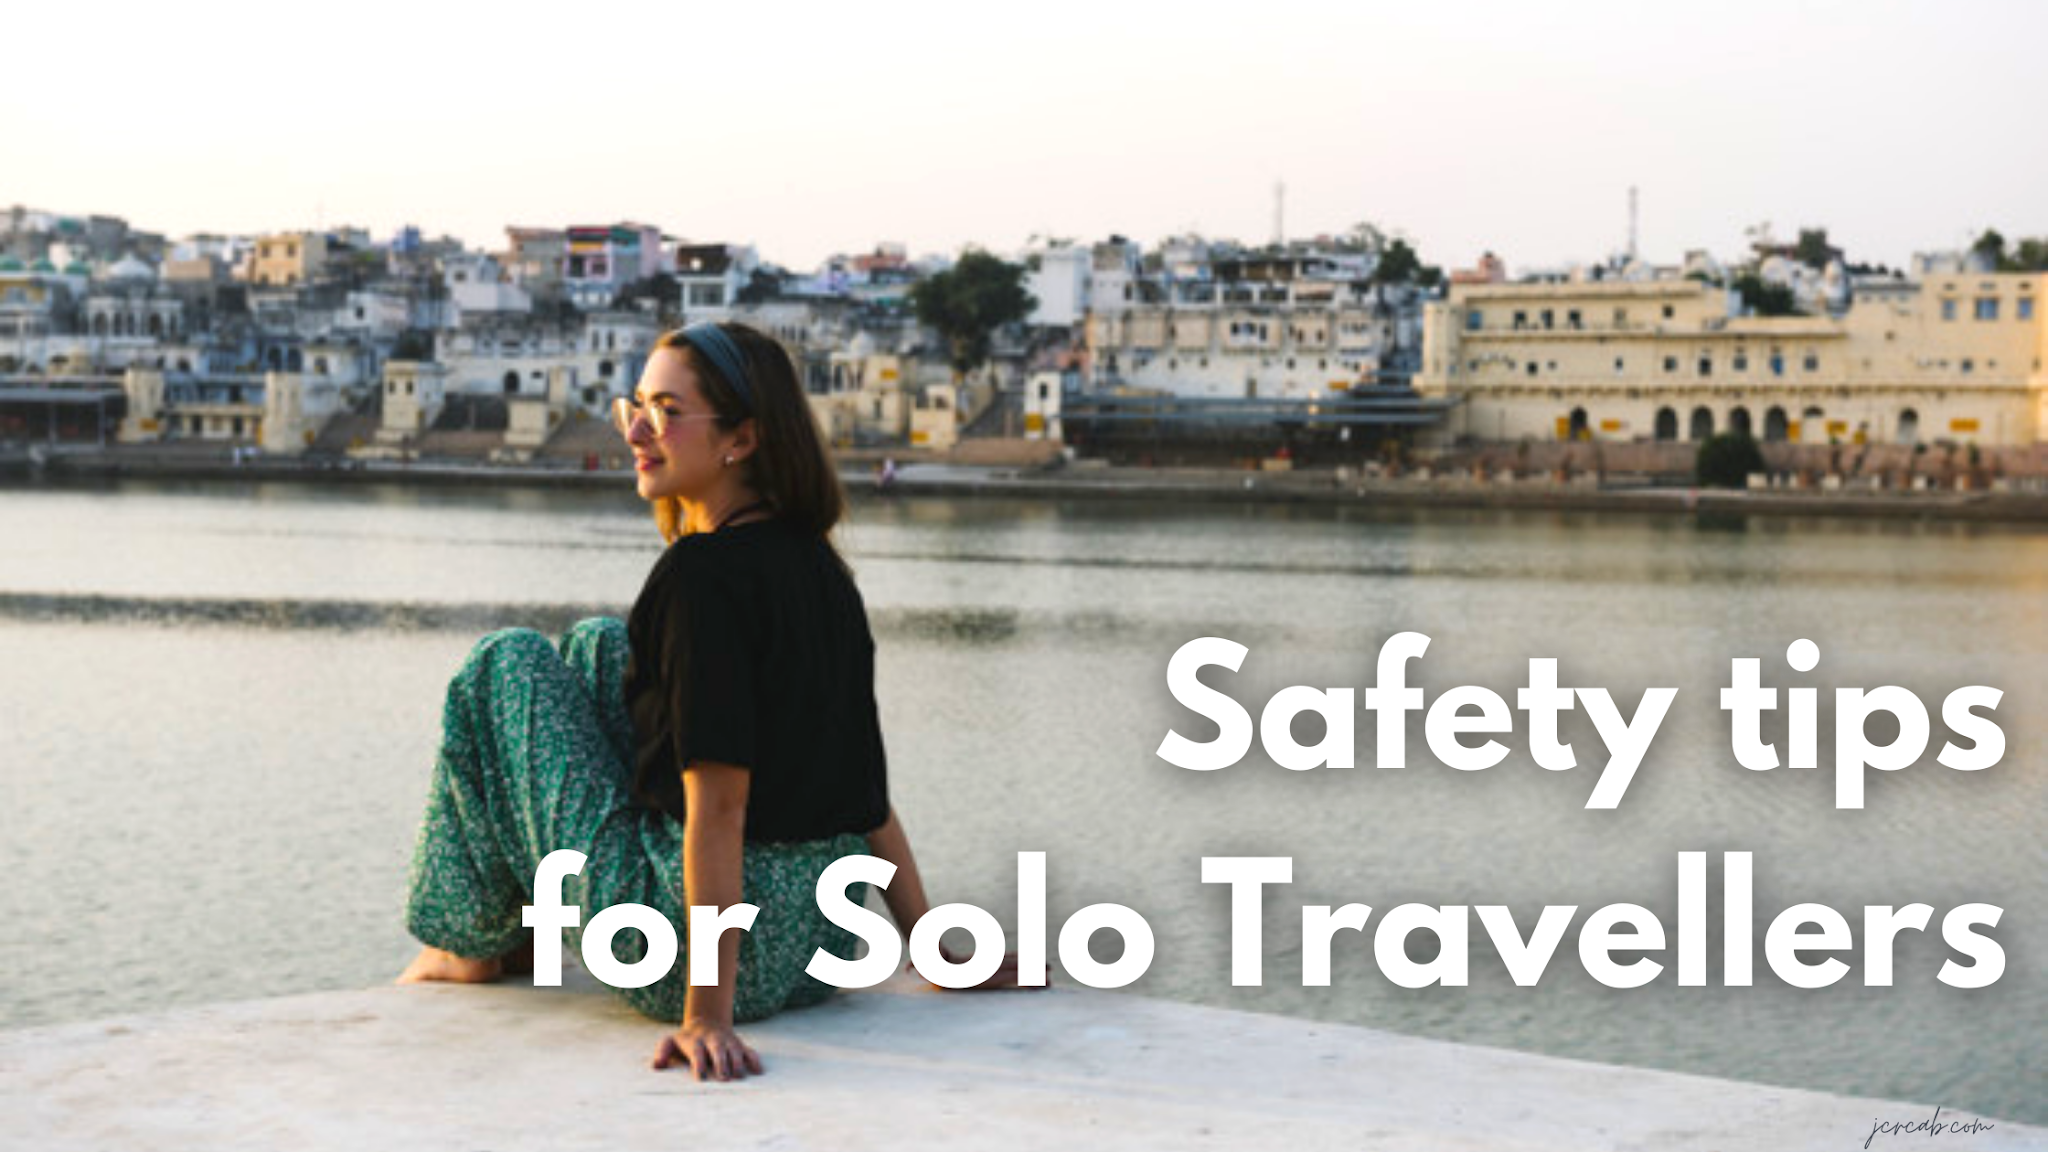 Safety tips for Solo Travellers